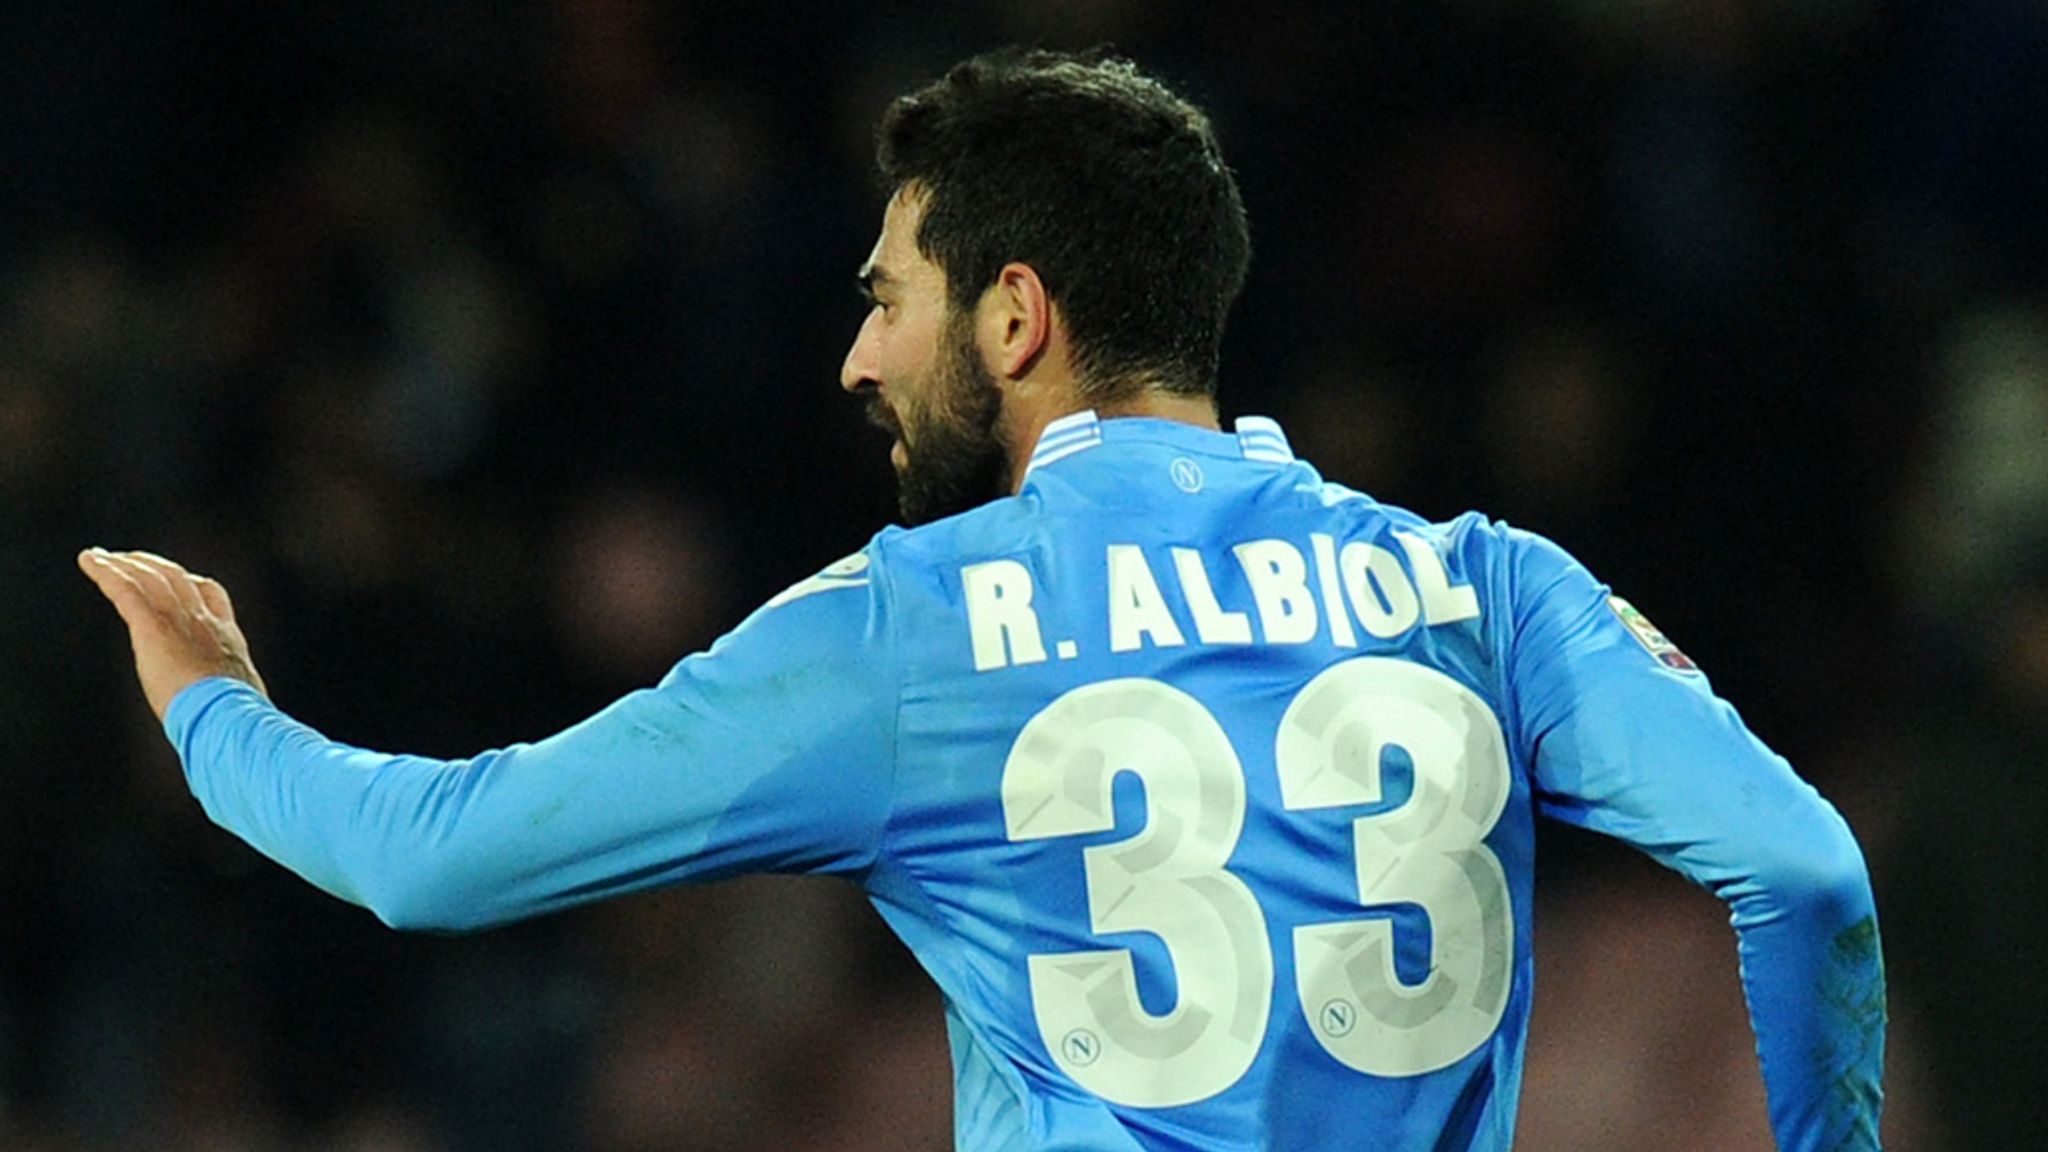 raul albiol jersey number